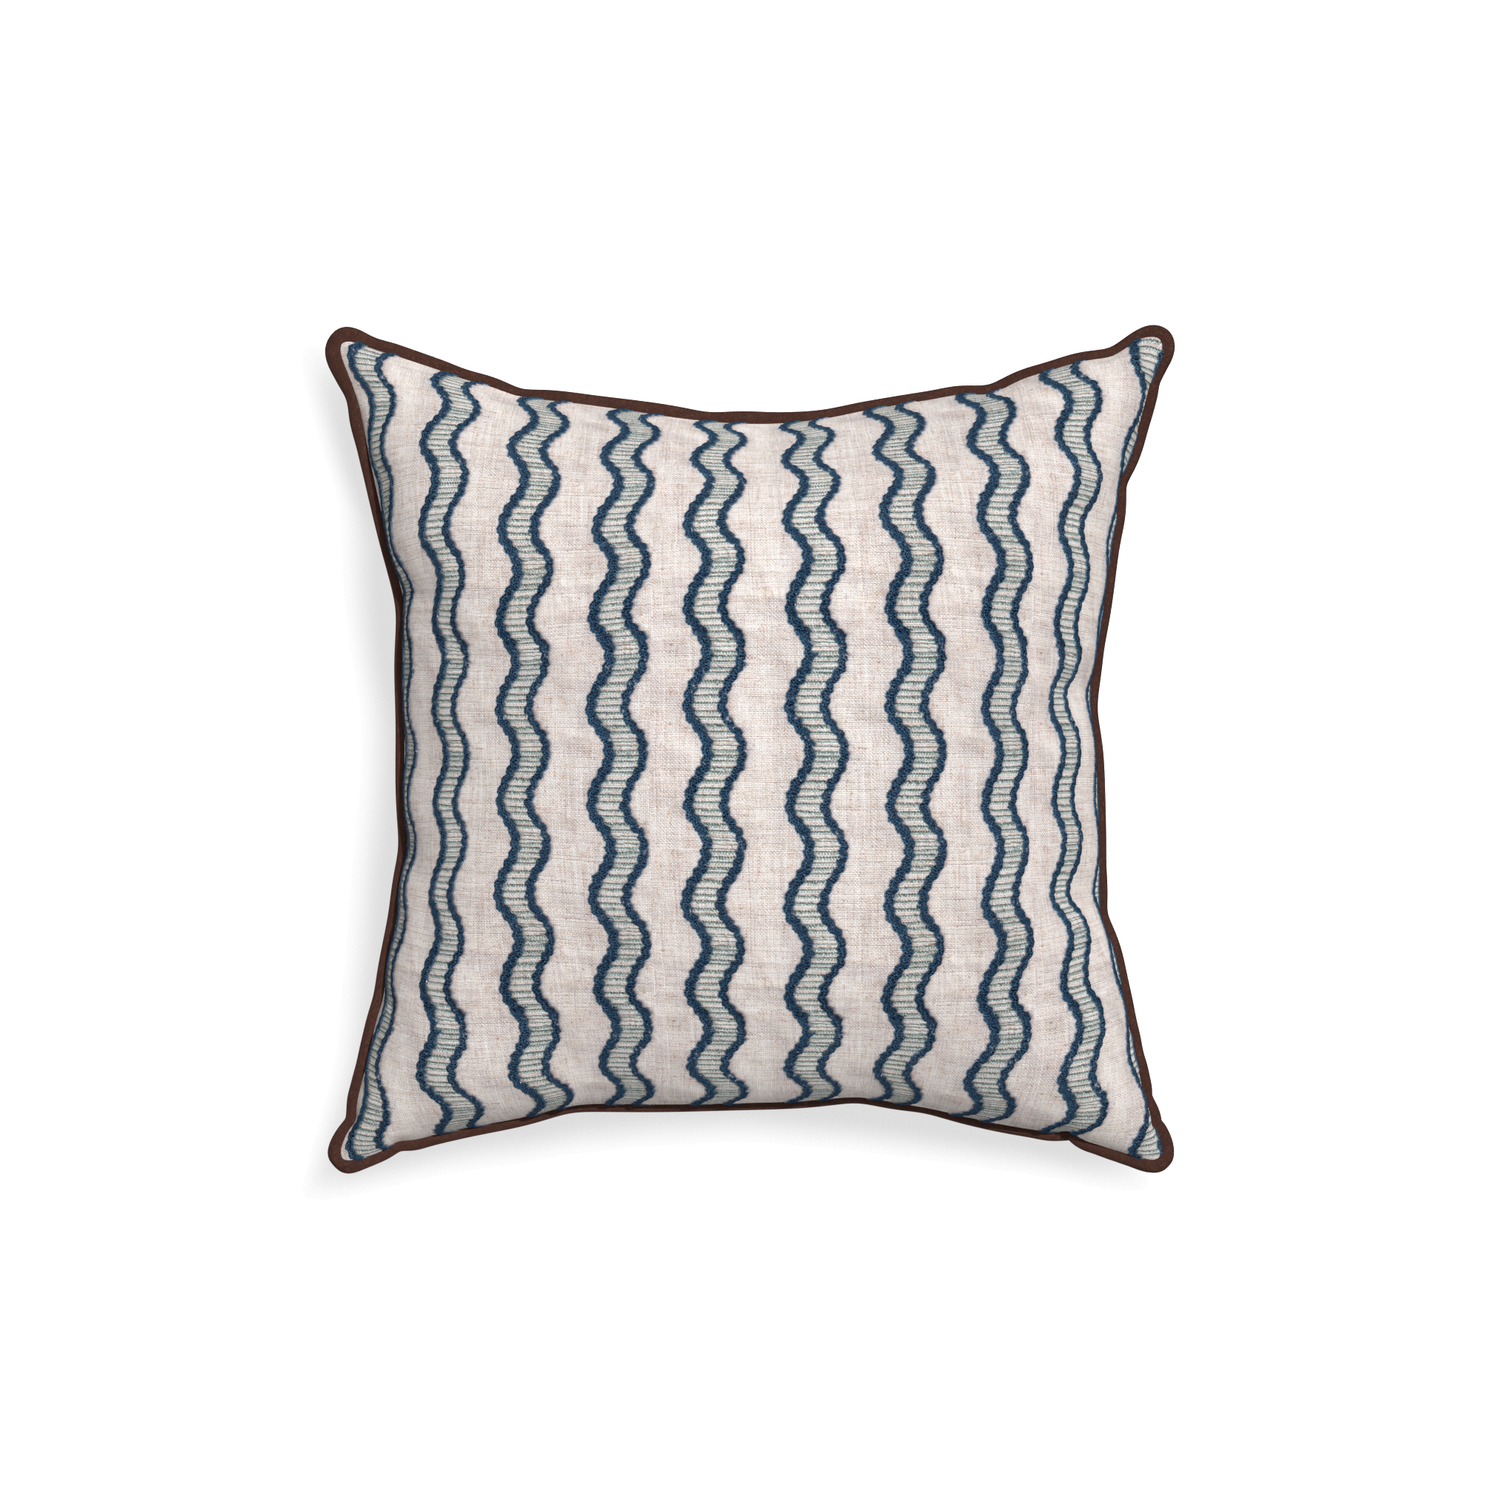 18-square beatrice custom embroidered wavepillow with w piping on white background